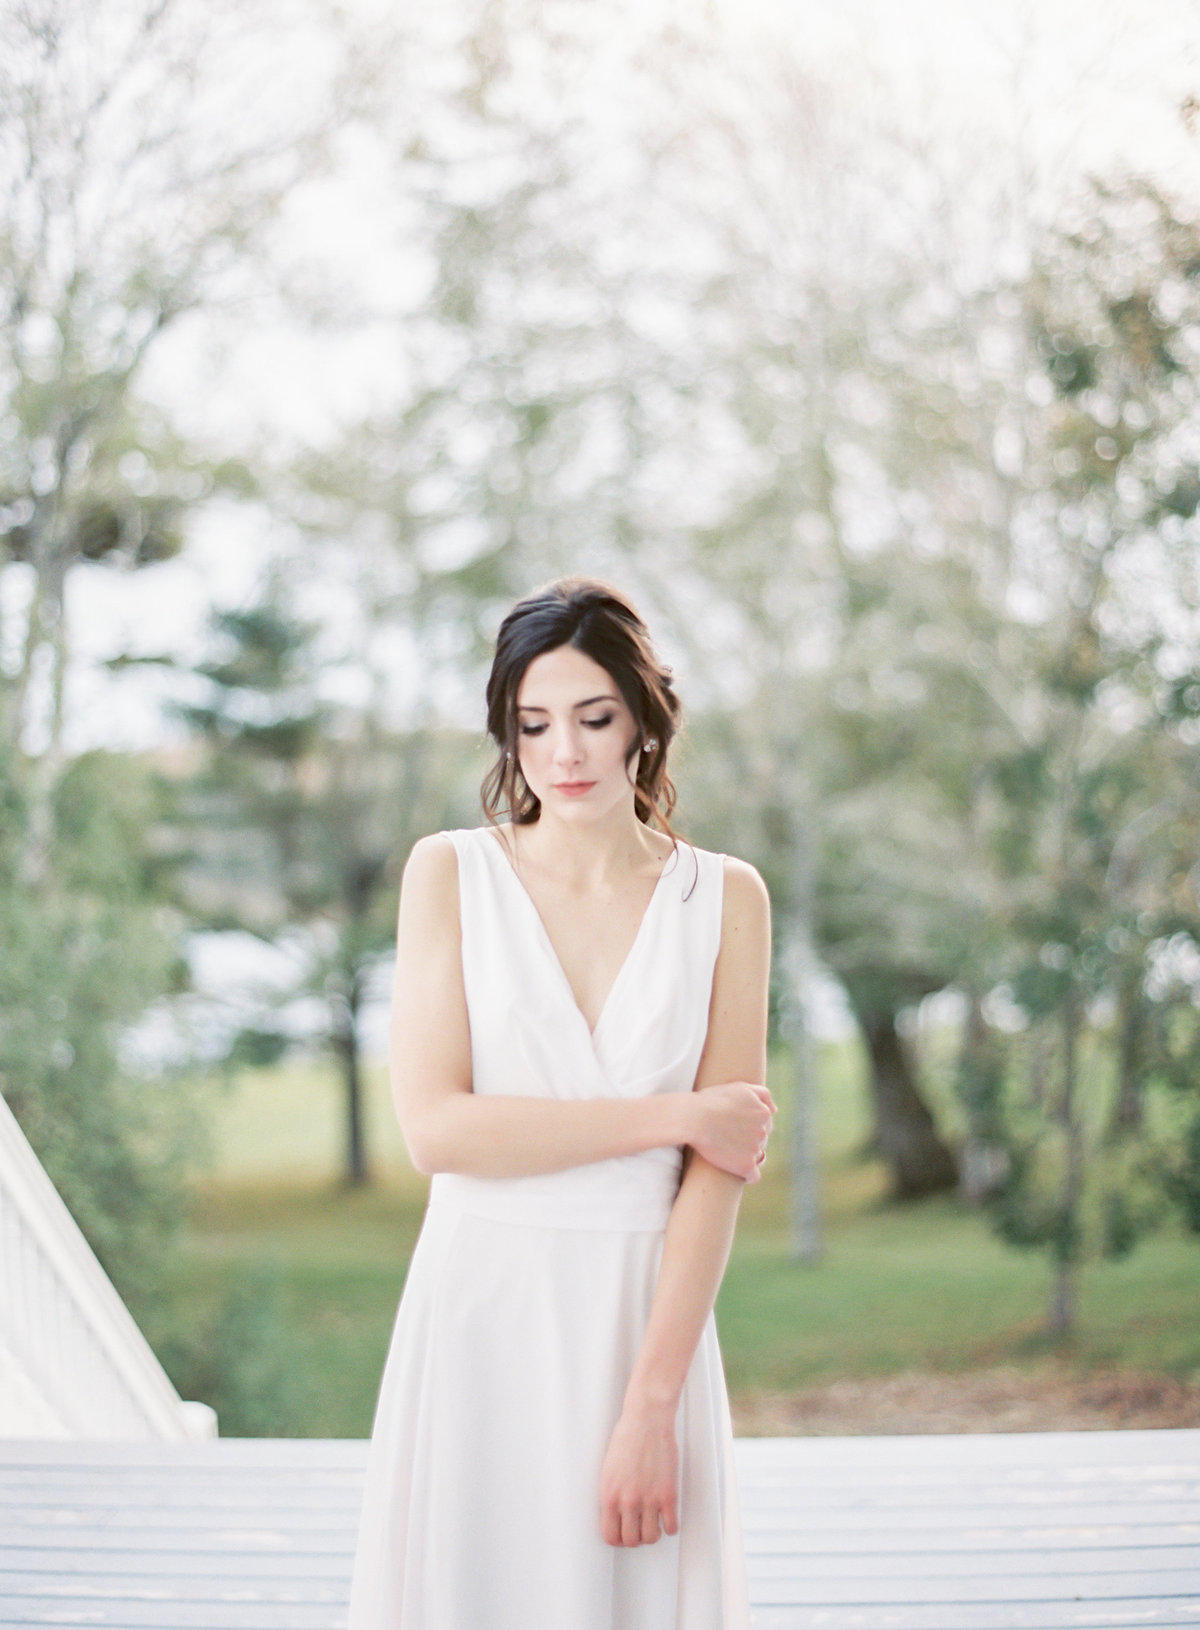 Jacqueline Anne Photography - Mount Uniacke Editorial-41